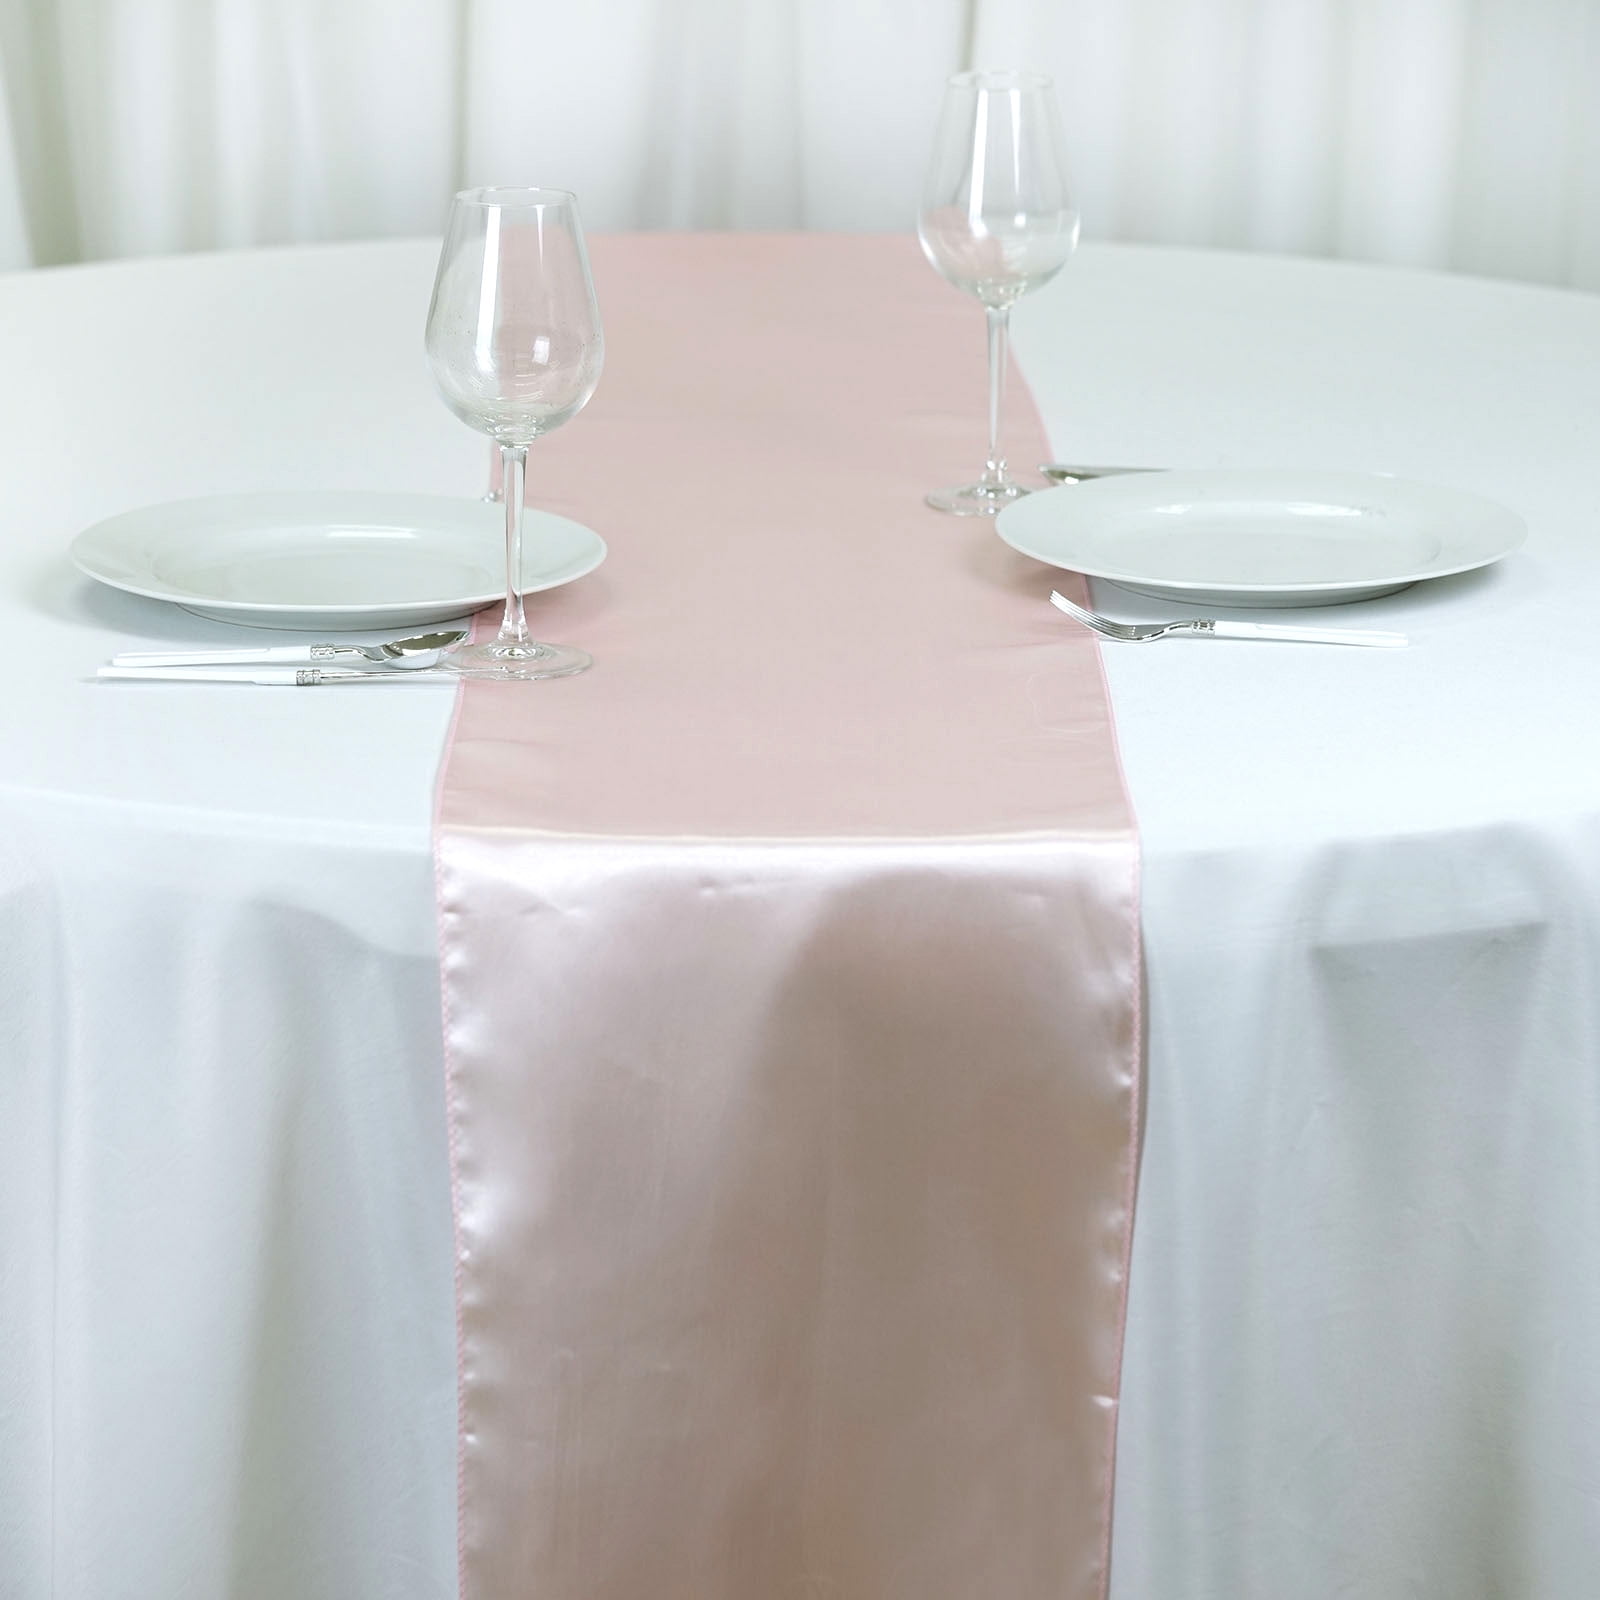 15 Tissue Lame 60"x60 Square Table Overlays Made USA Overlay for Tablecloths 